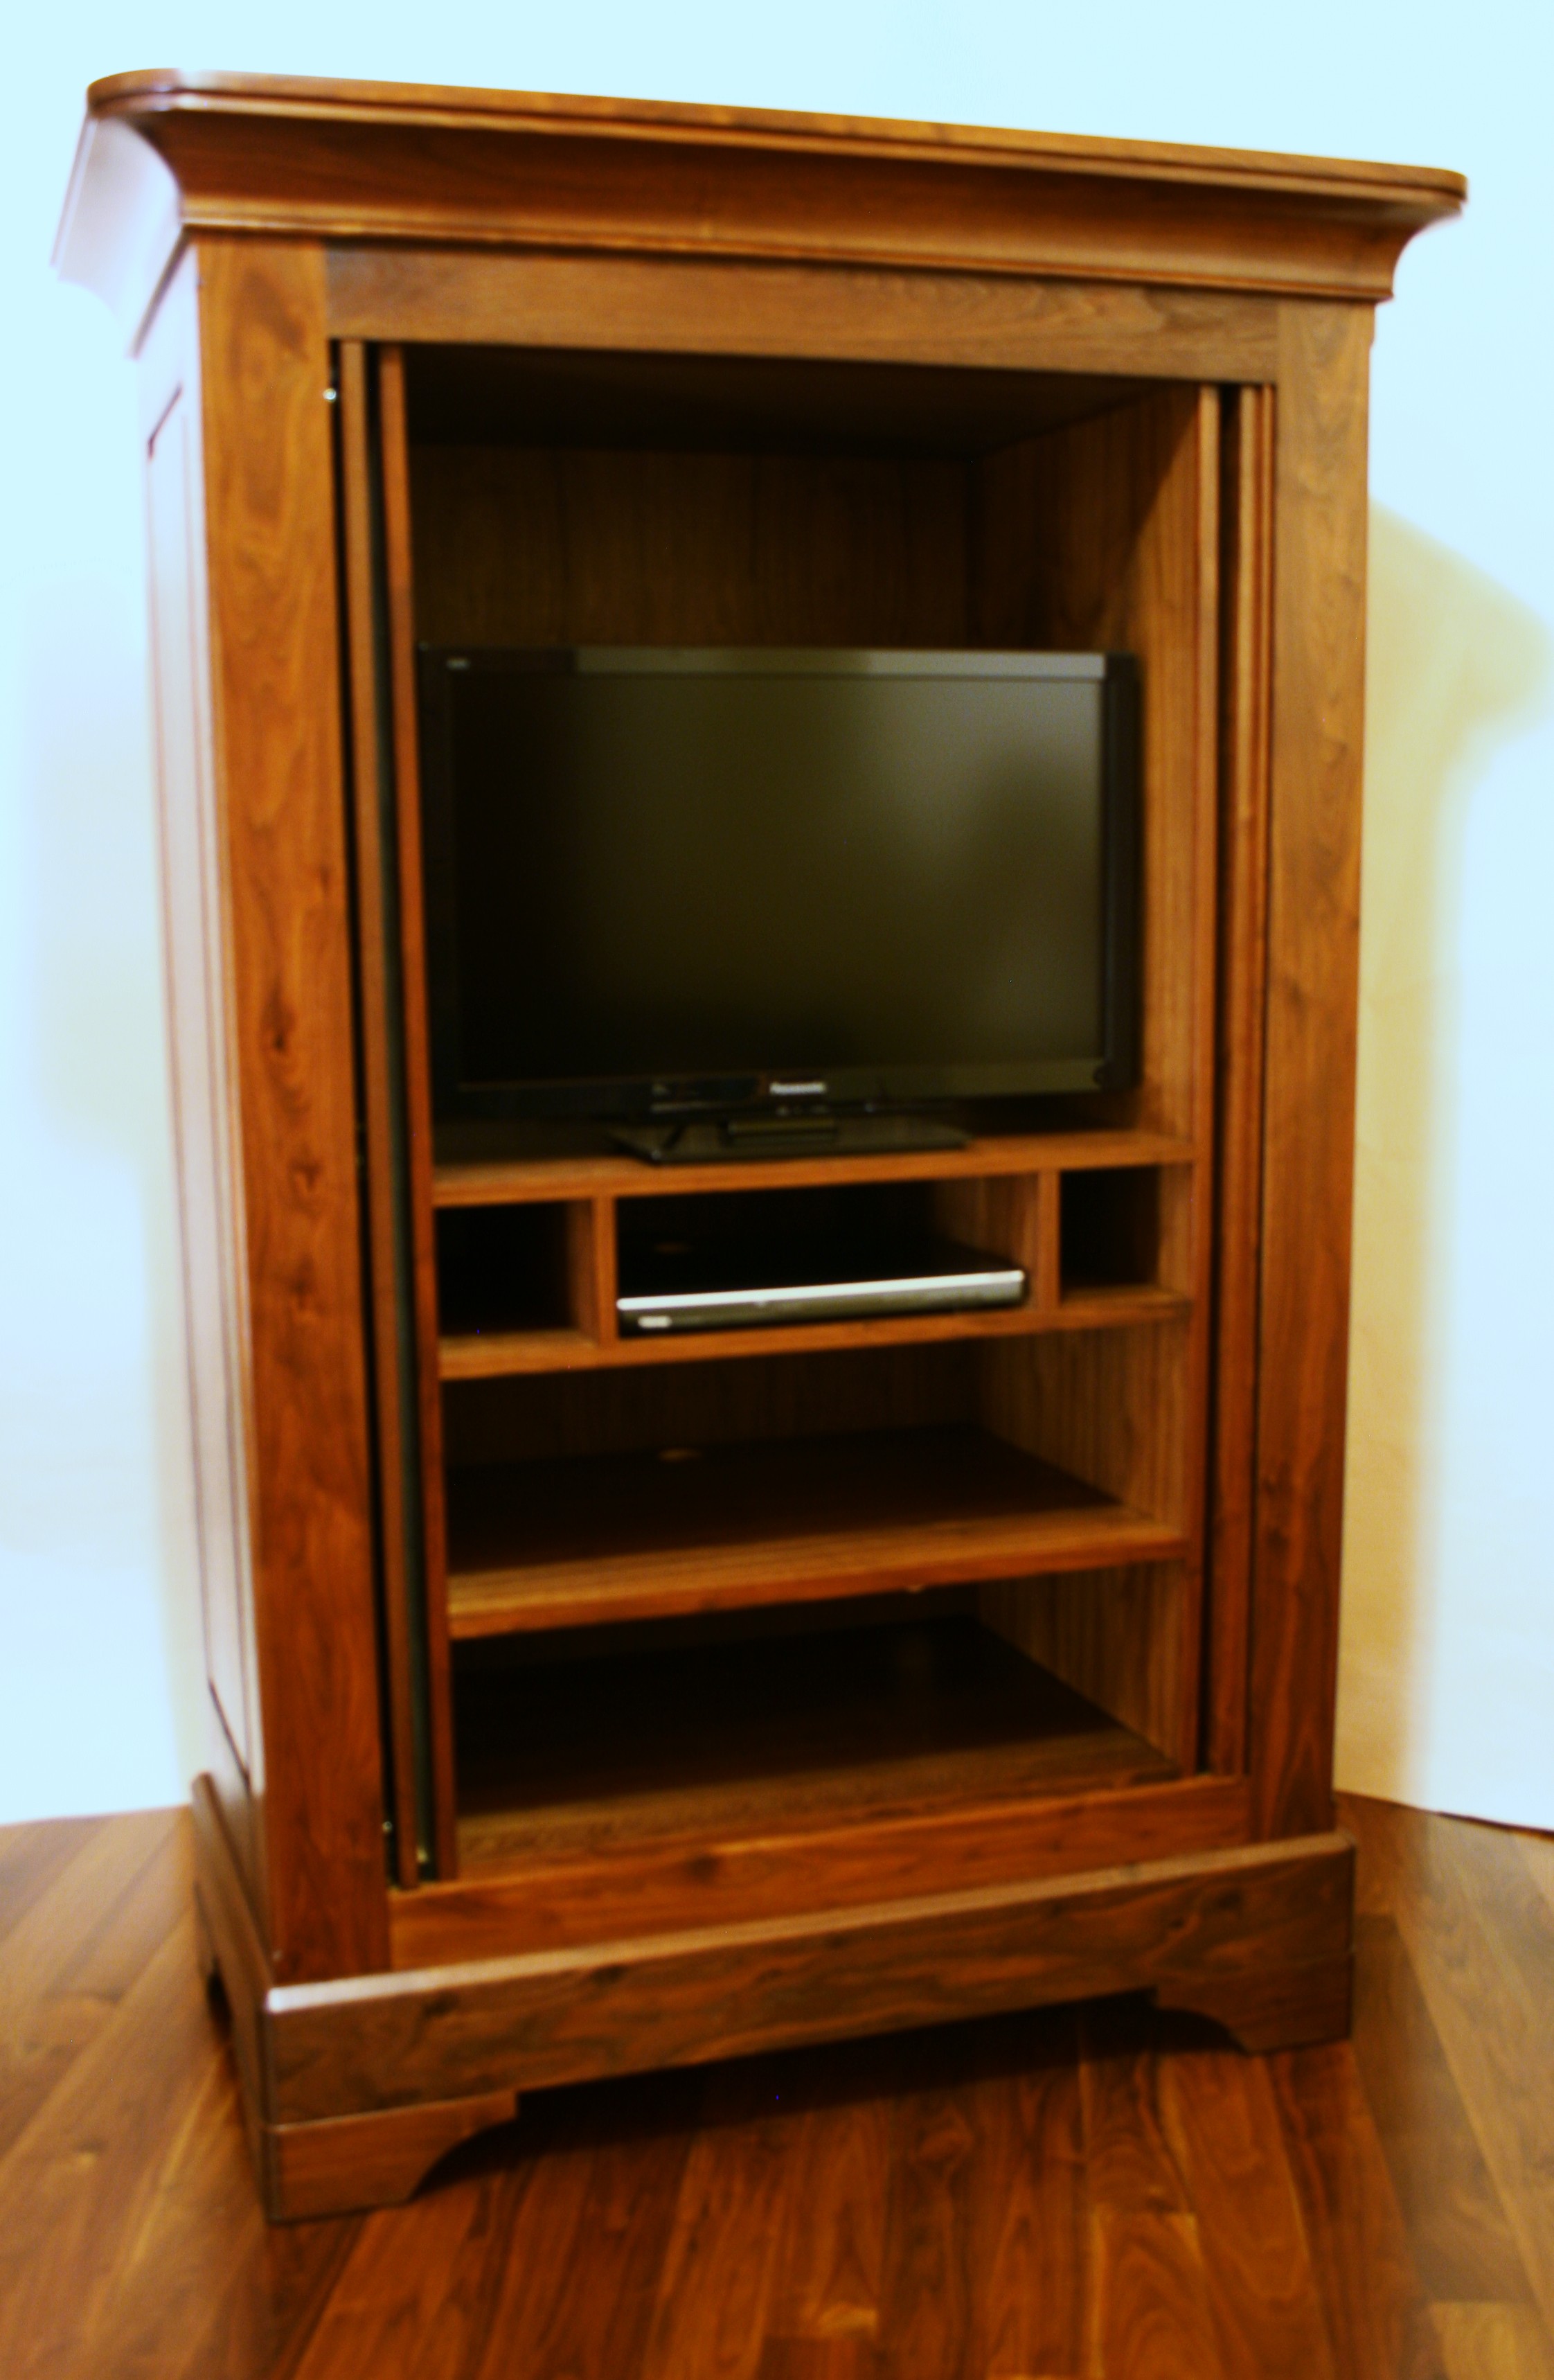 Interior of solid walnut armoire